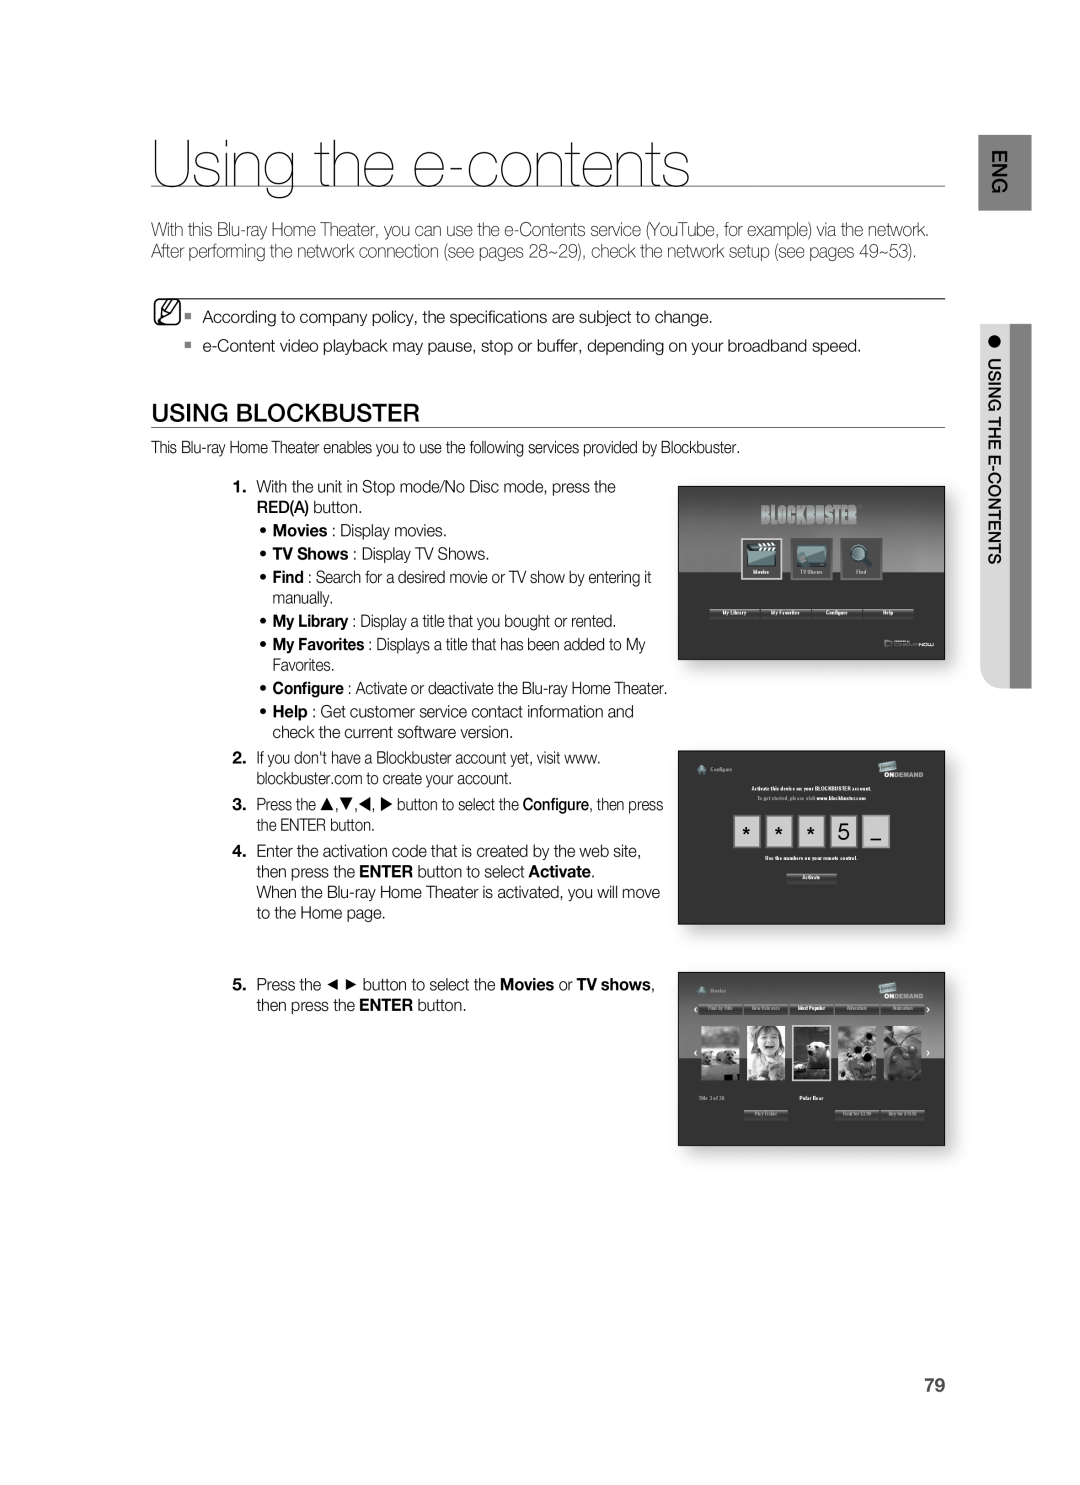 Samsung HT-BD8200 user manual Using the e-contents, Using Blockbuster, • TV Shows : Display TV Shows, manually 